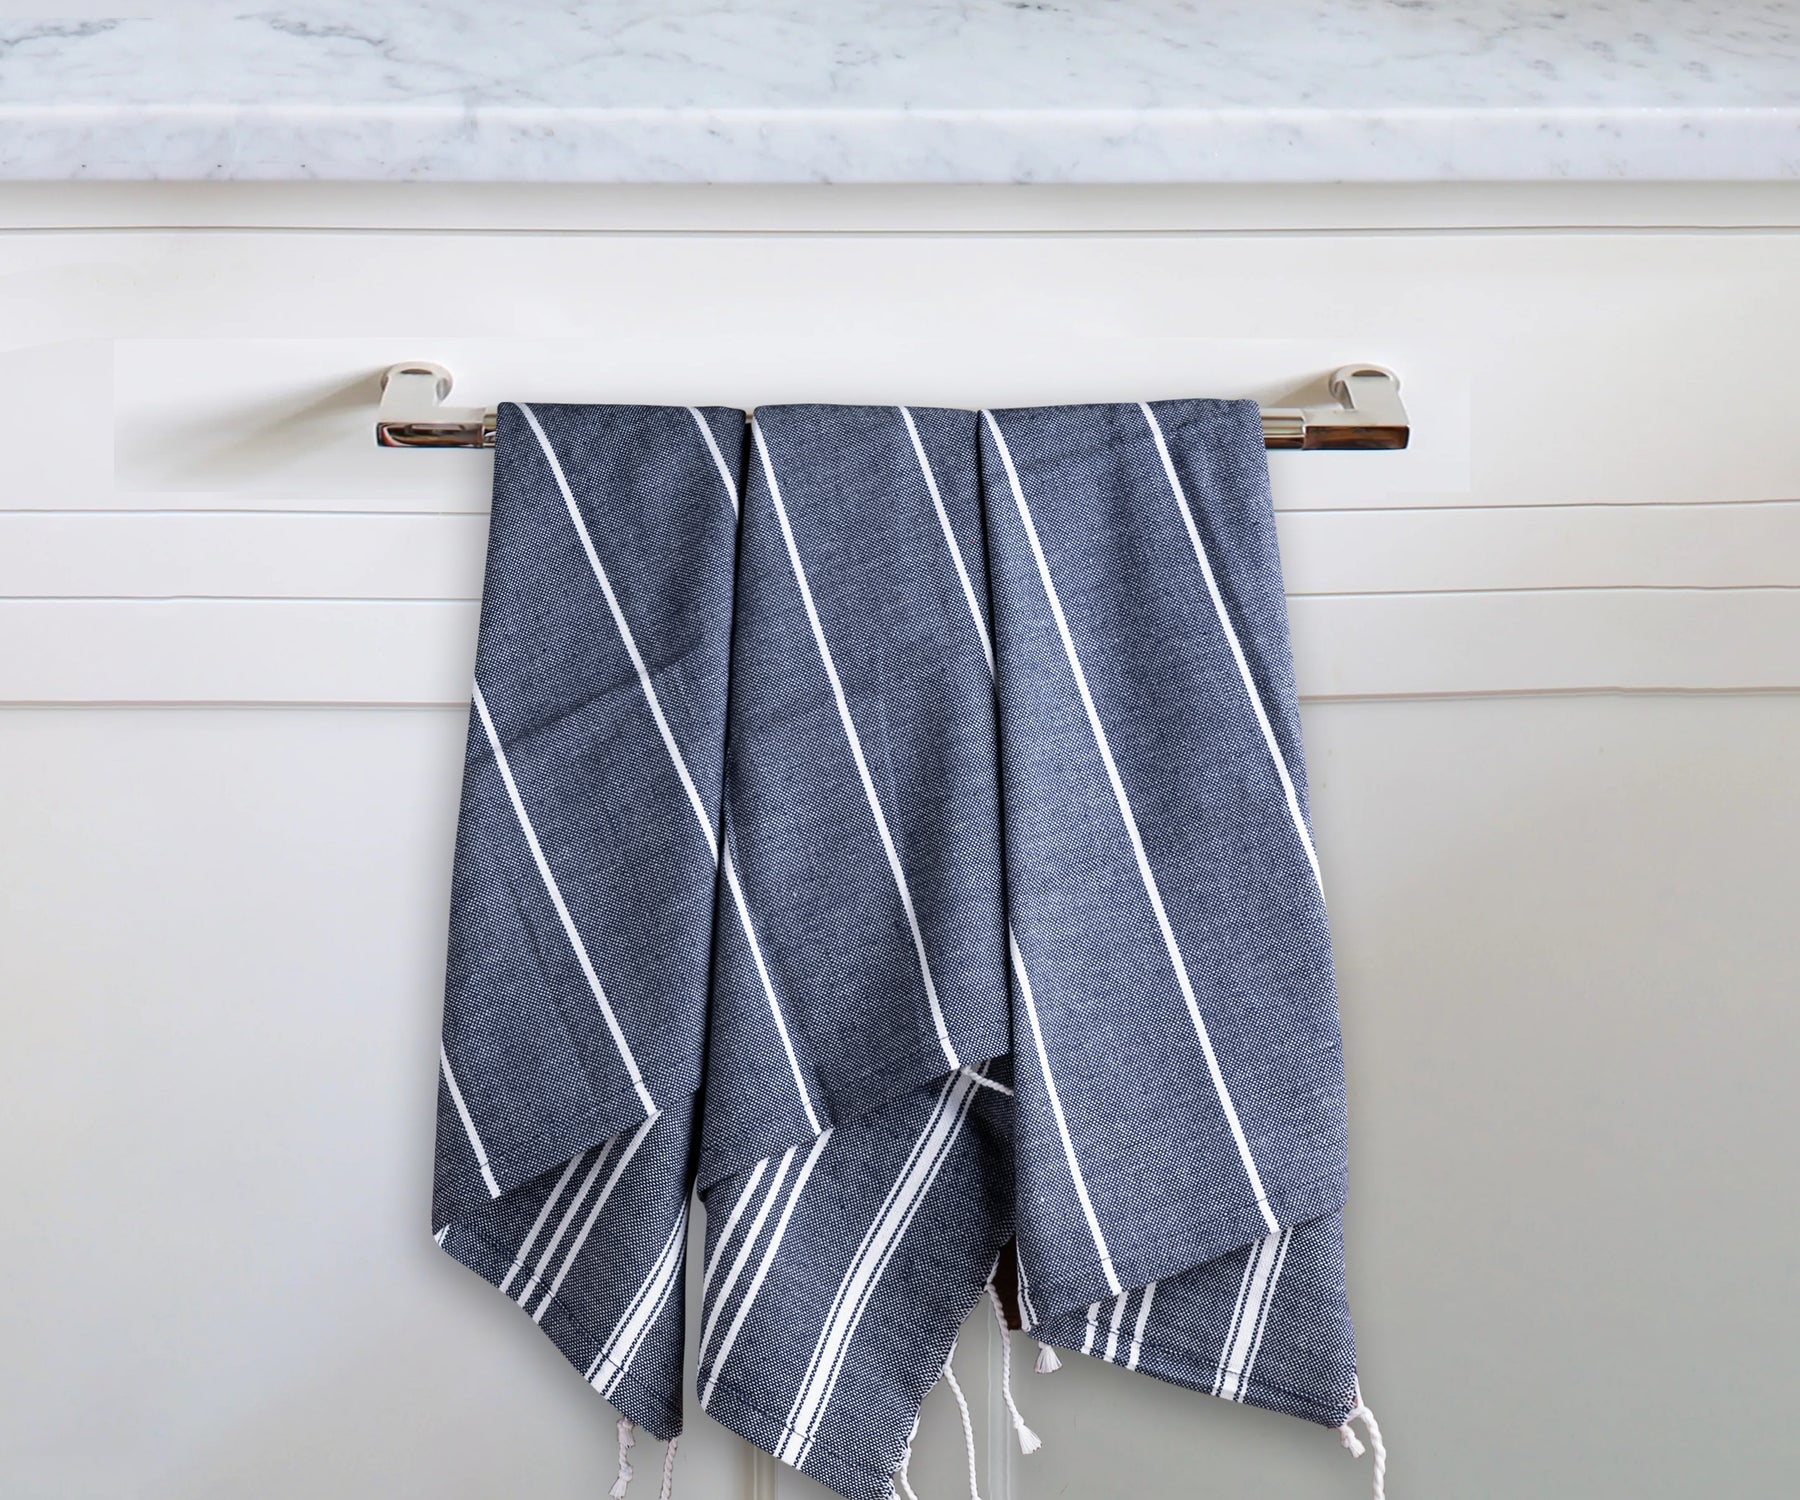 Set of 4 Rockridge Striped Kitchen Towels, Taupe, Neutral, Cotton Sold by at Home